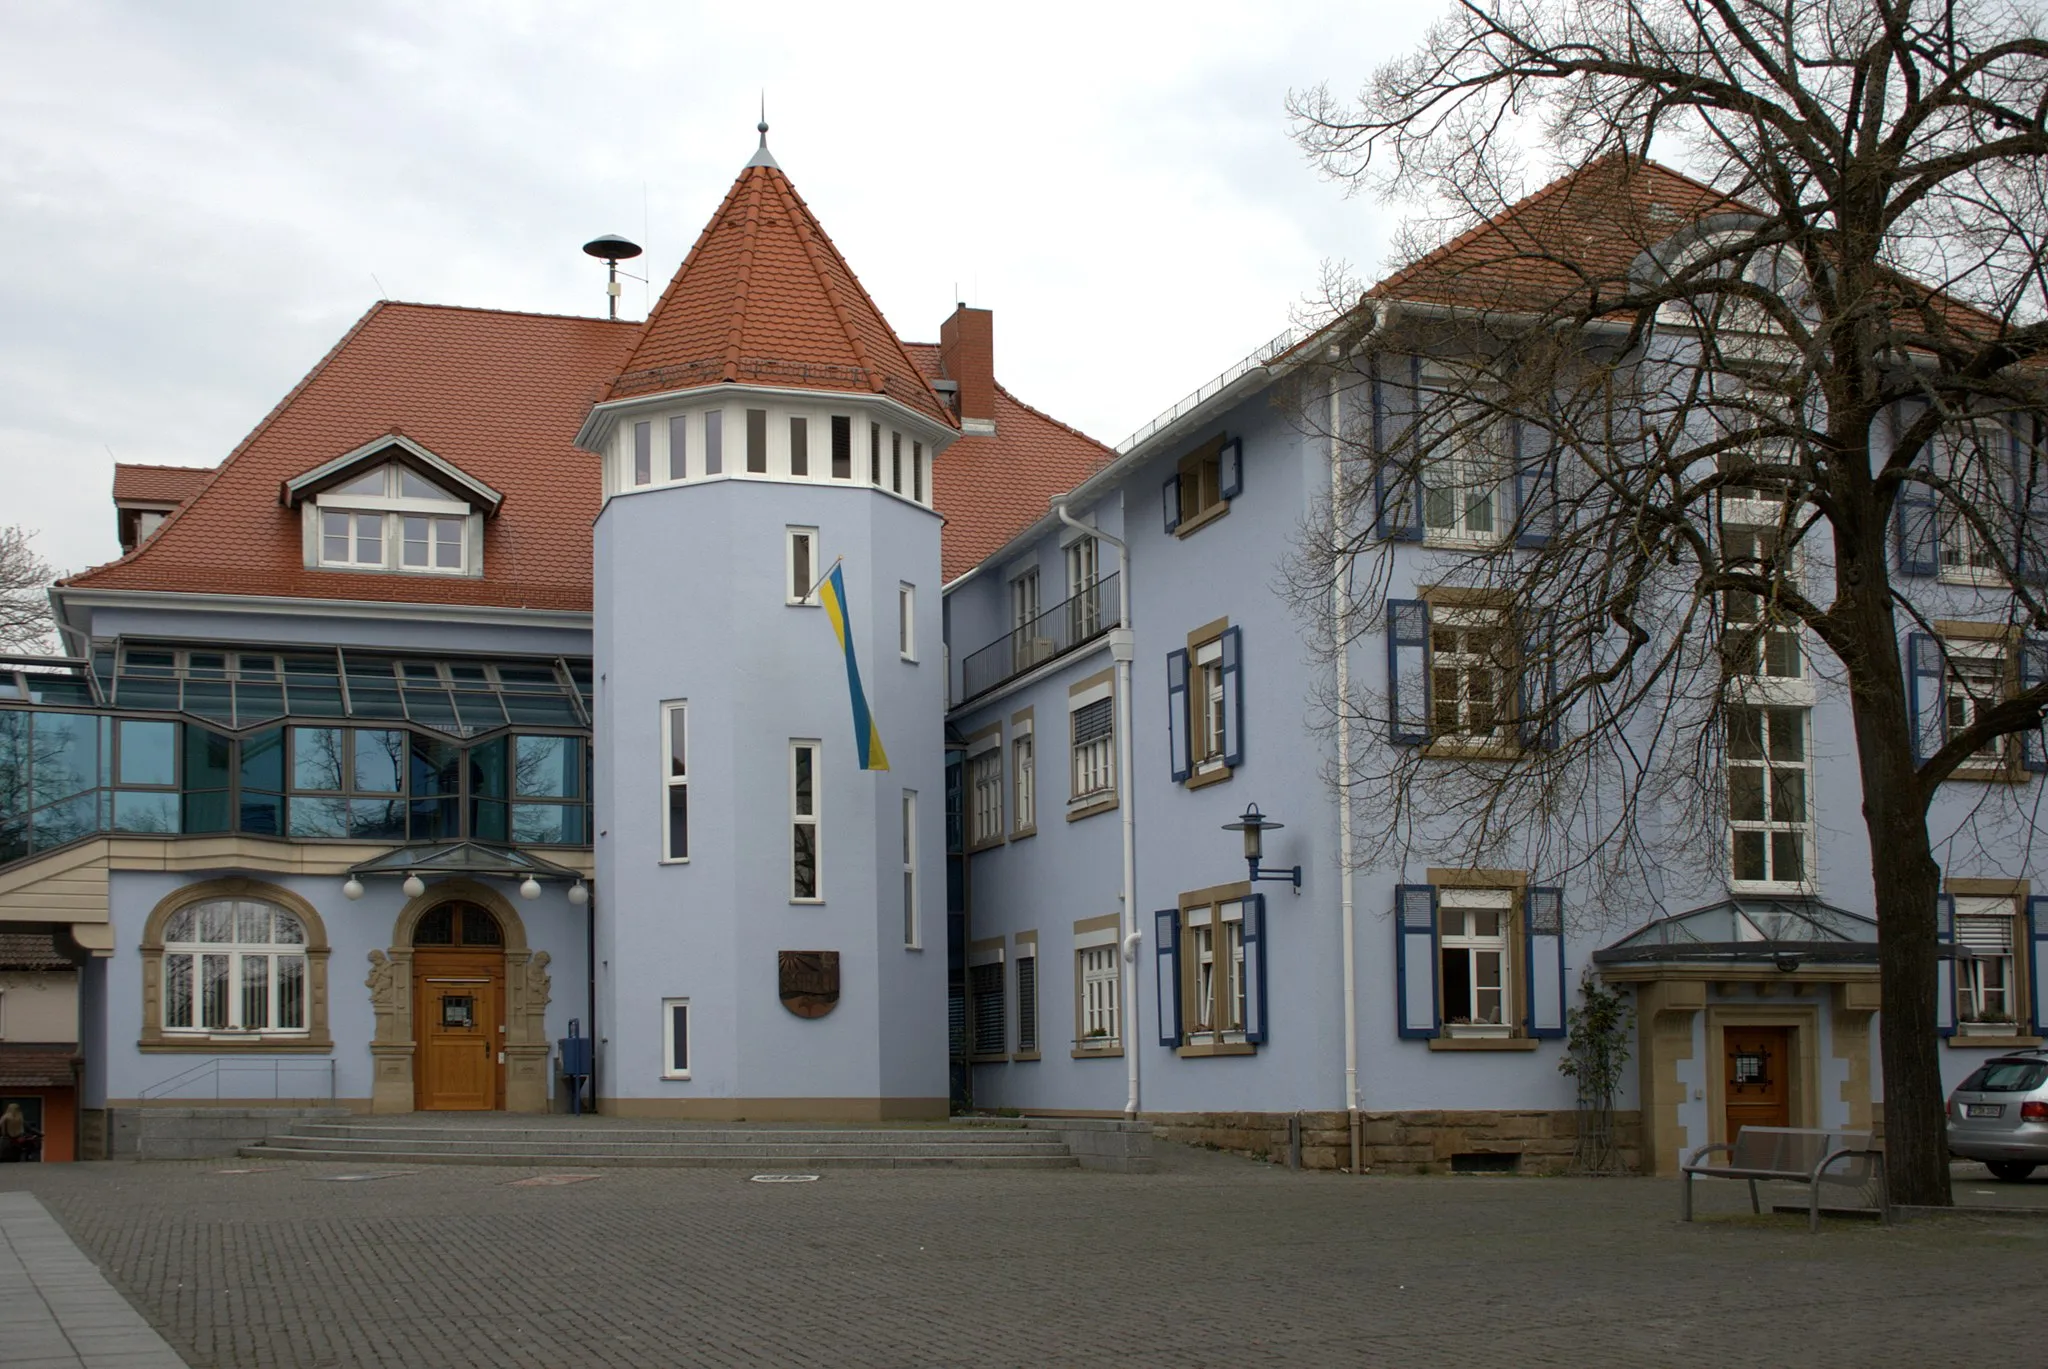 Photo showing: The town hall of Bad Krozingen